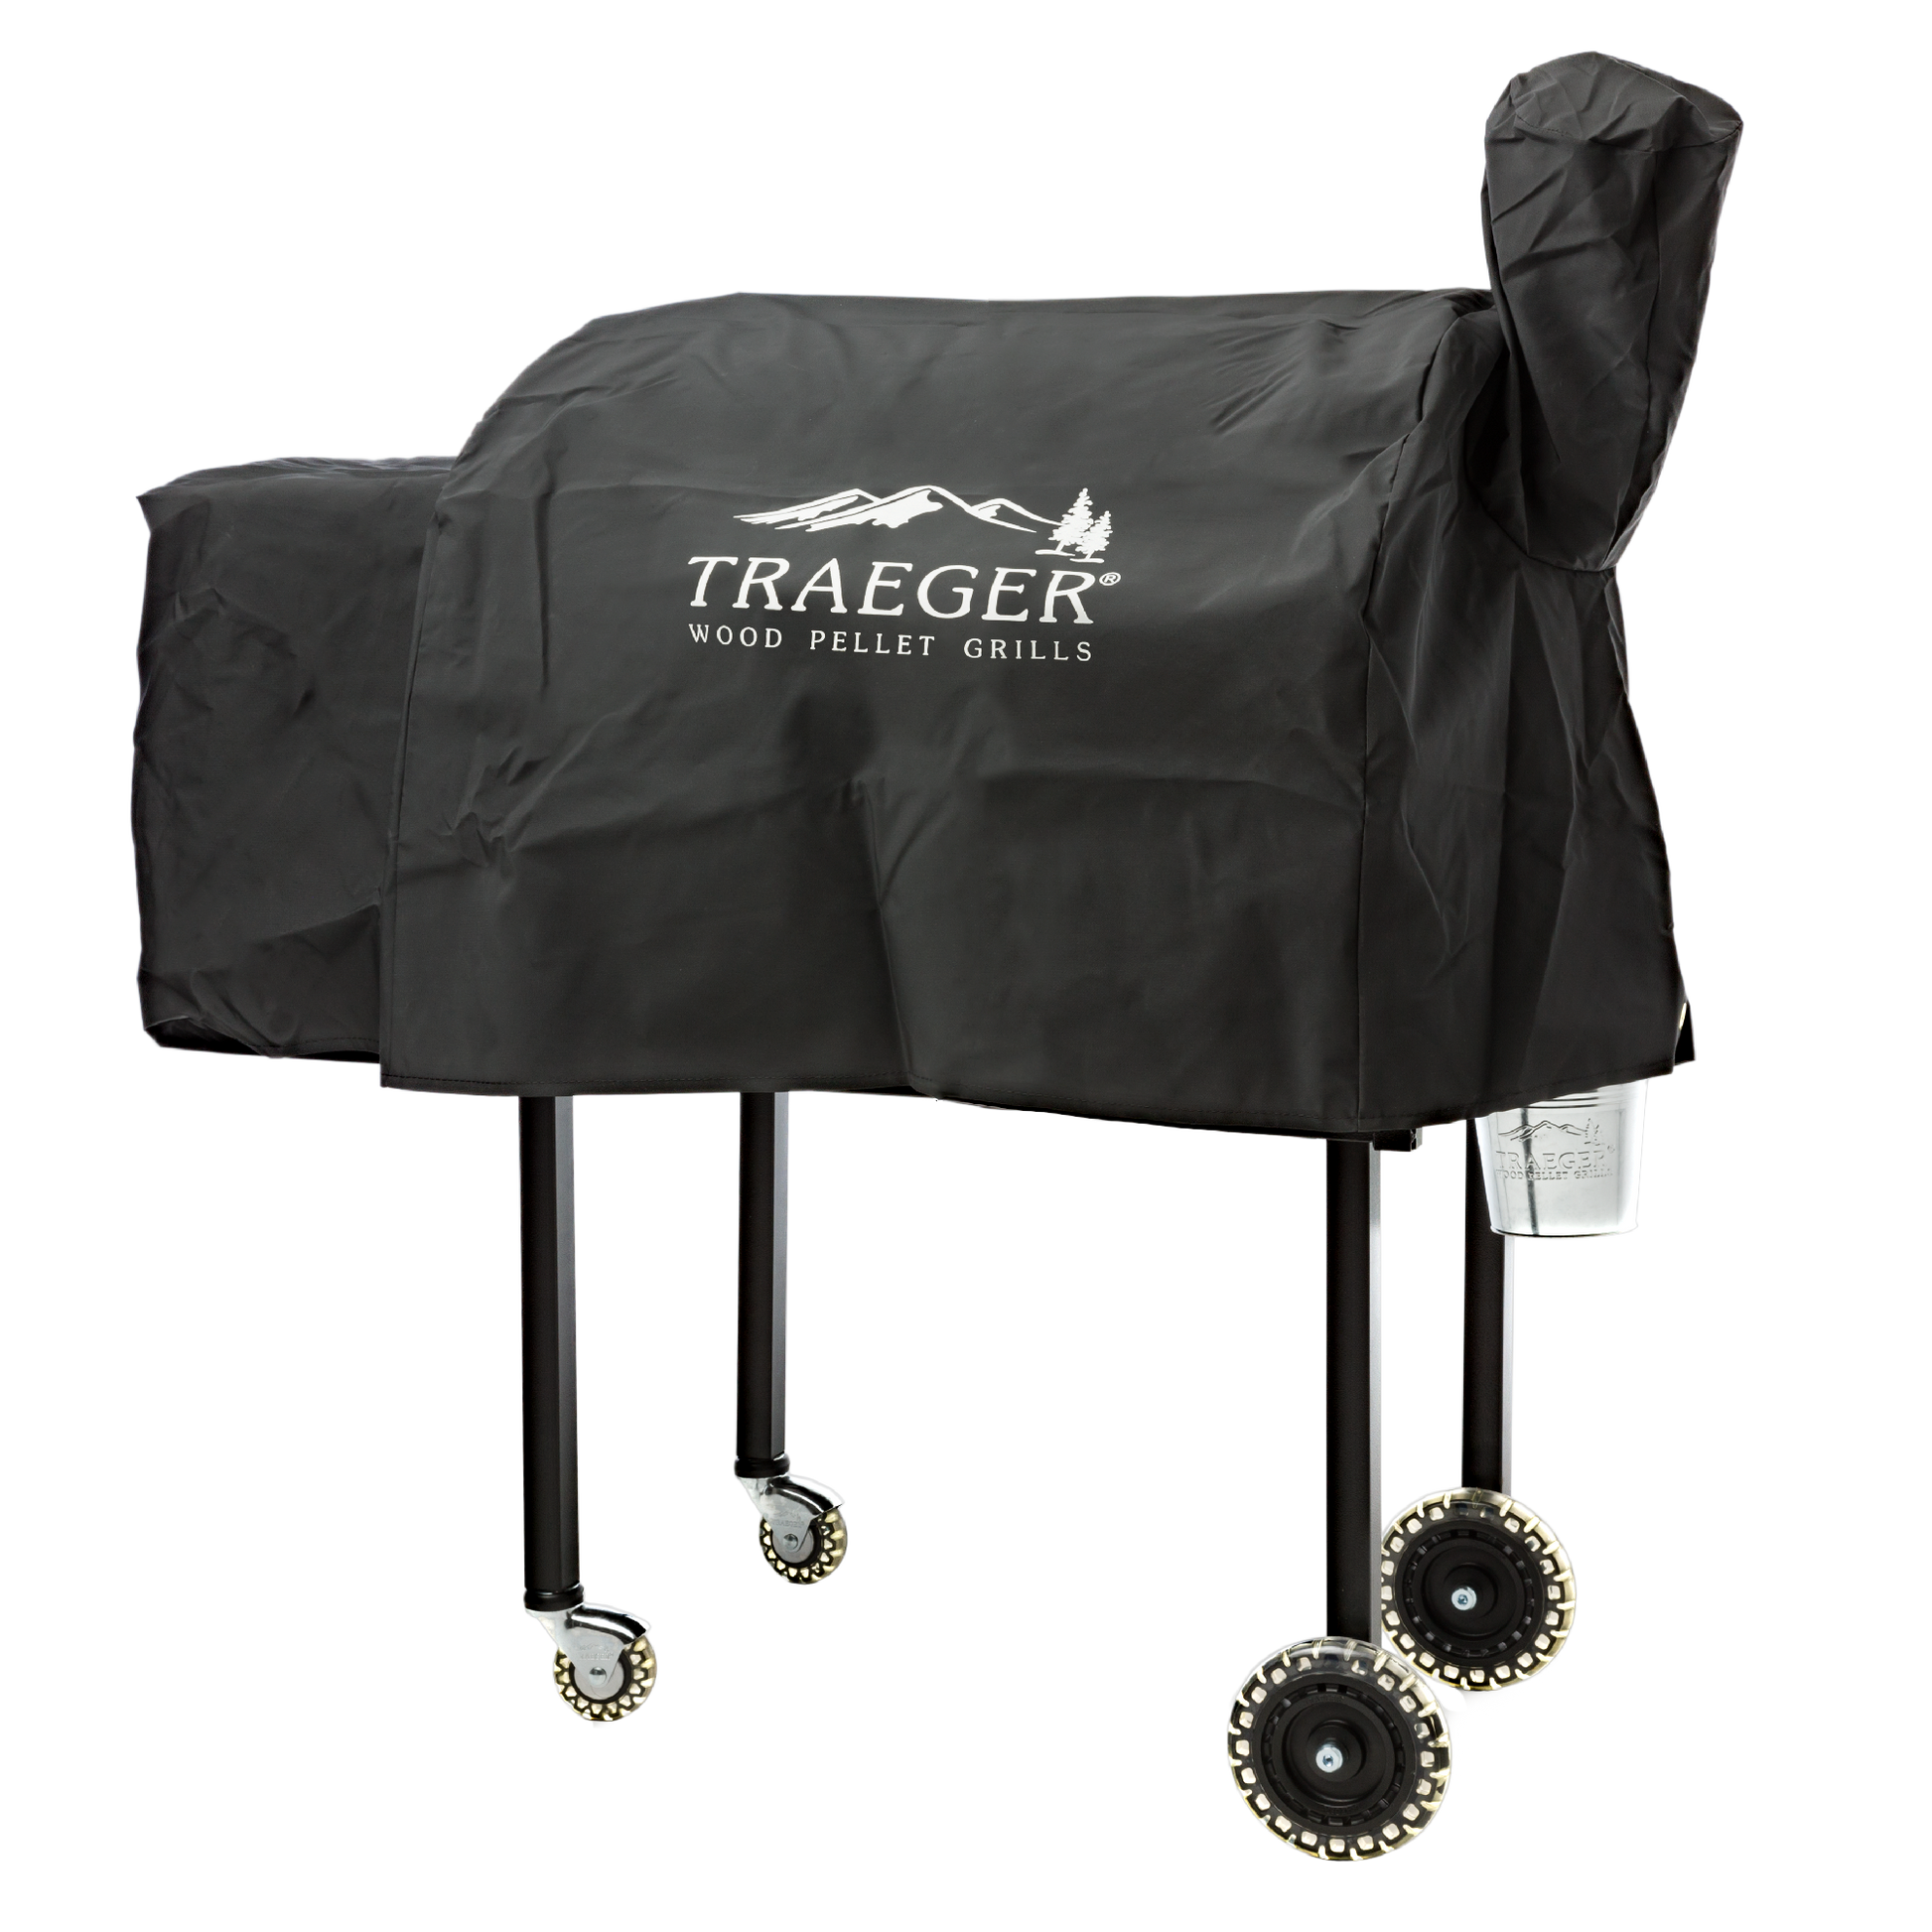 Traeger All Weather Cover - LIL' TEX is available in our Jacobs Custom Living Spokane Valley showroom.